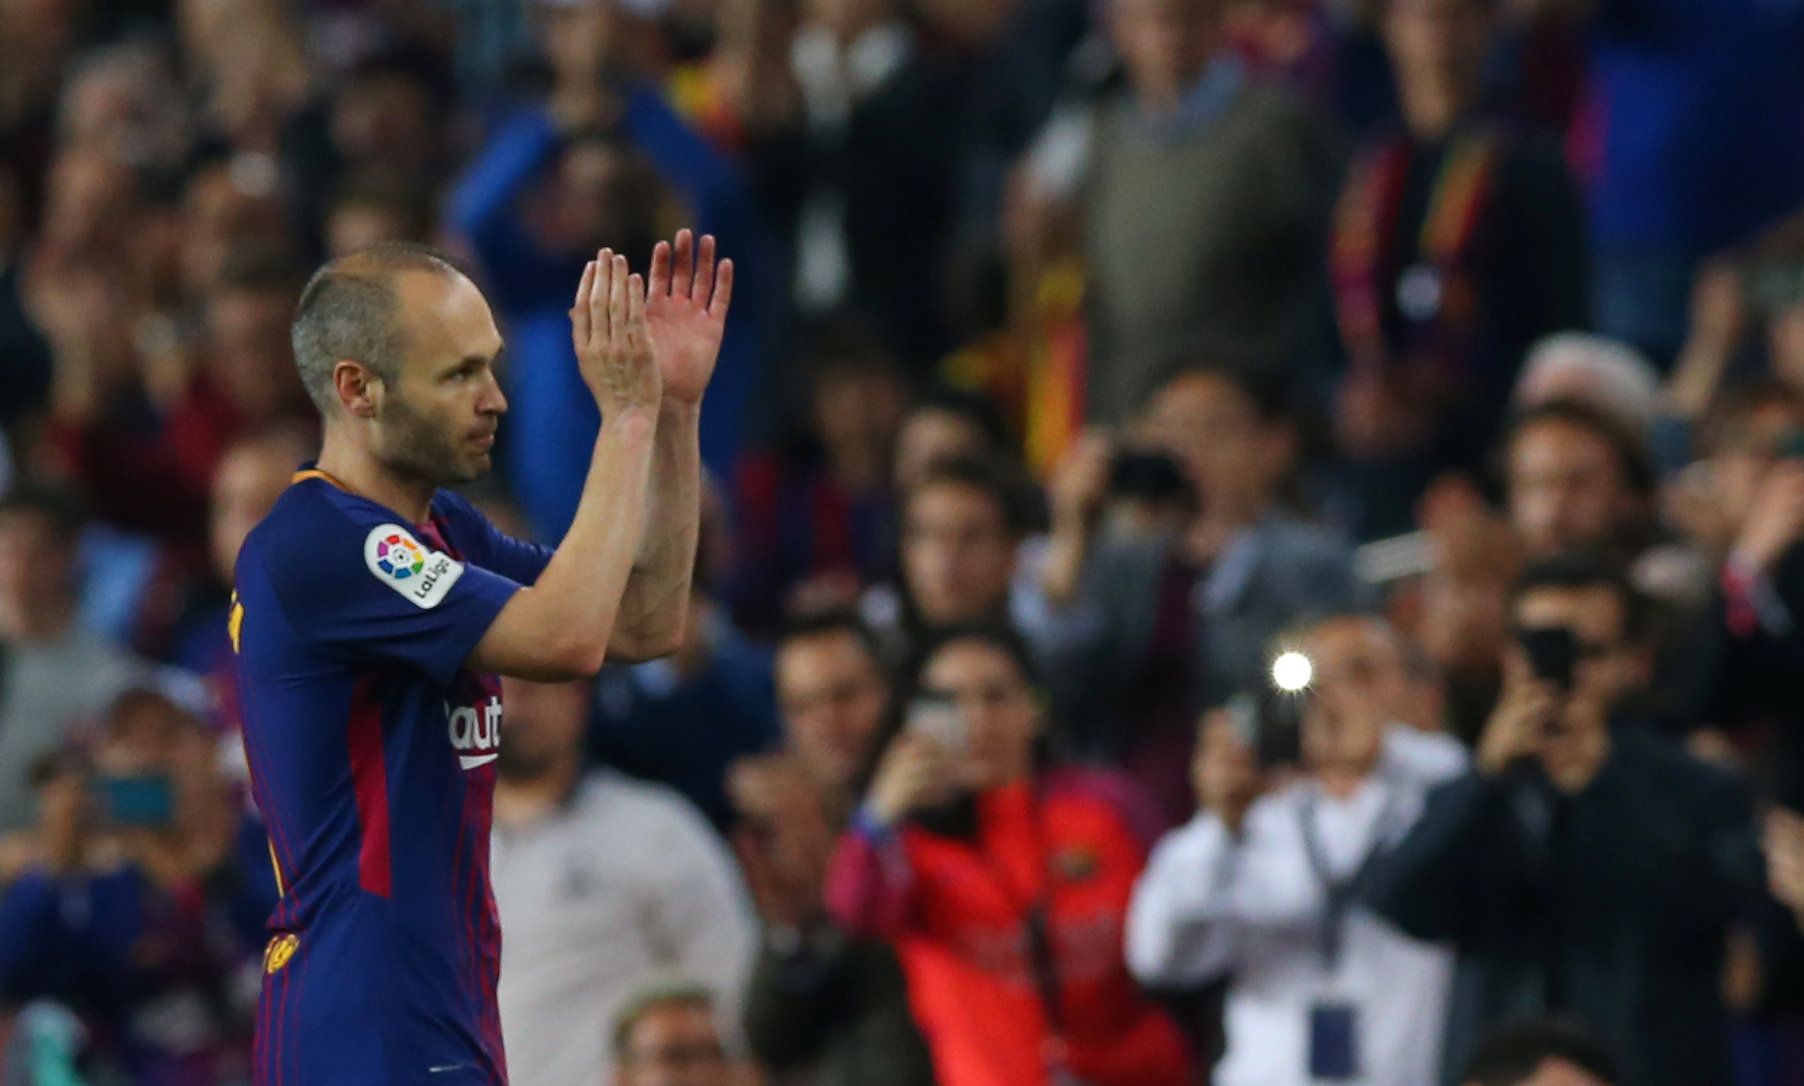 Soccer Football - La Liga Santander - FC Barcelona v Villarreal - Camp Nou, Barcelona, Spain - May 9, 2018   Barcelona's Andres Iniesta applauds their fans as he leaves the pitch after being substituted   REUTERS/Albert Gea